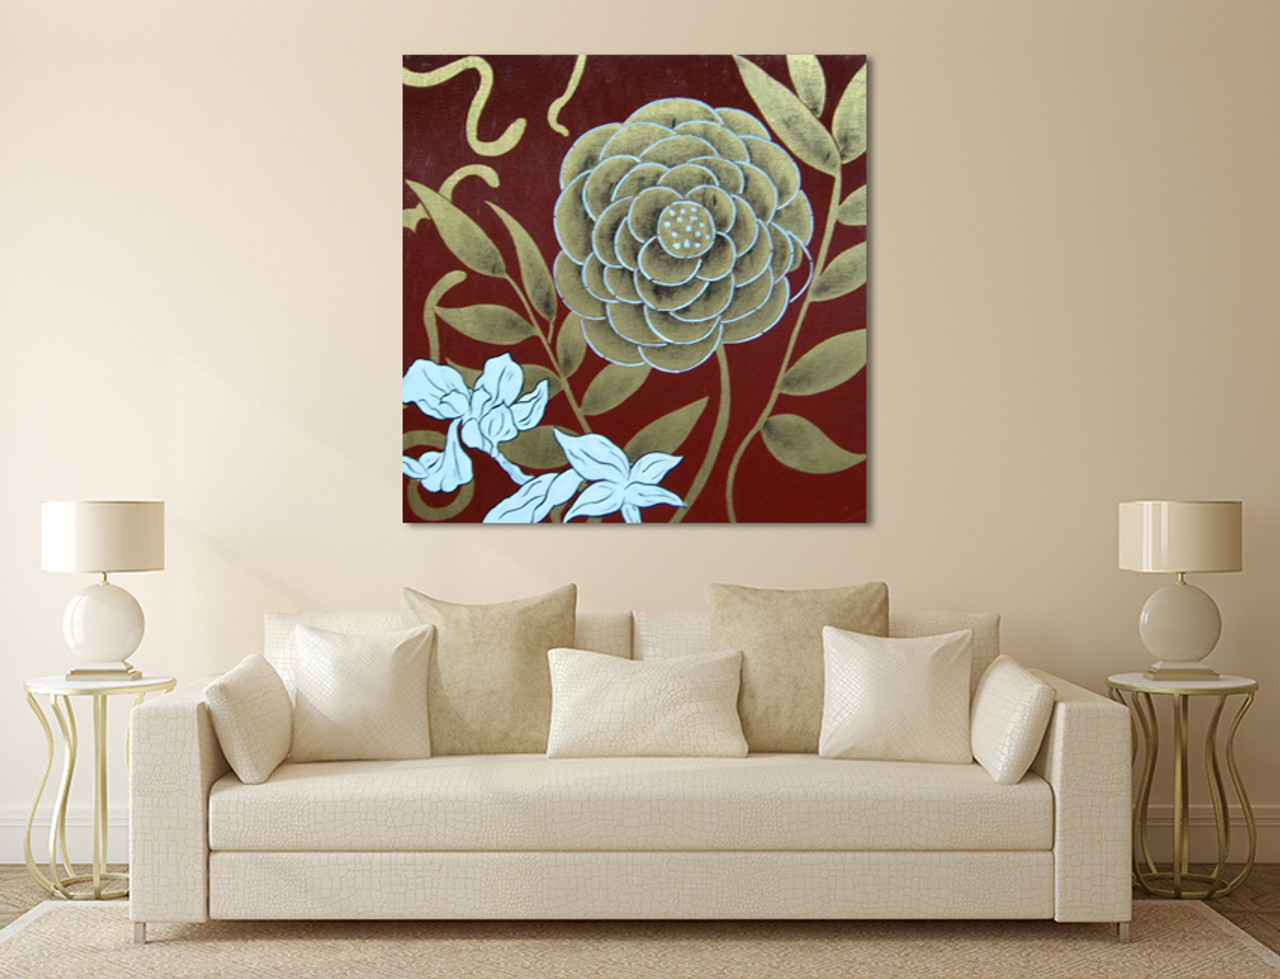 sq414184 | Canvas Paintings Online and Wall Inspirations